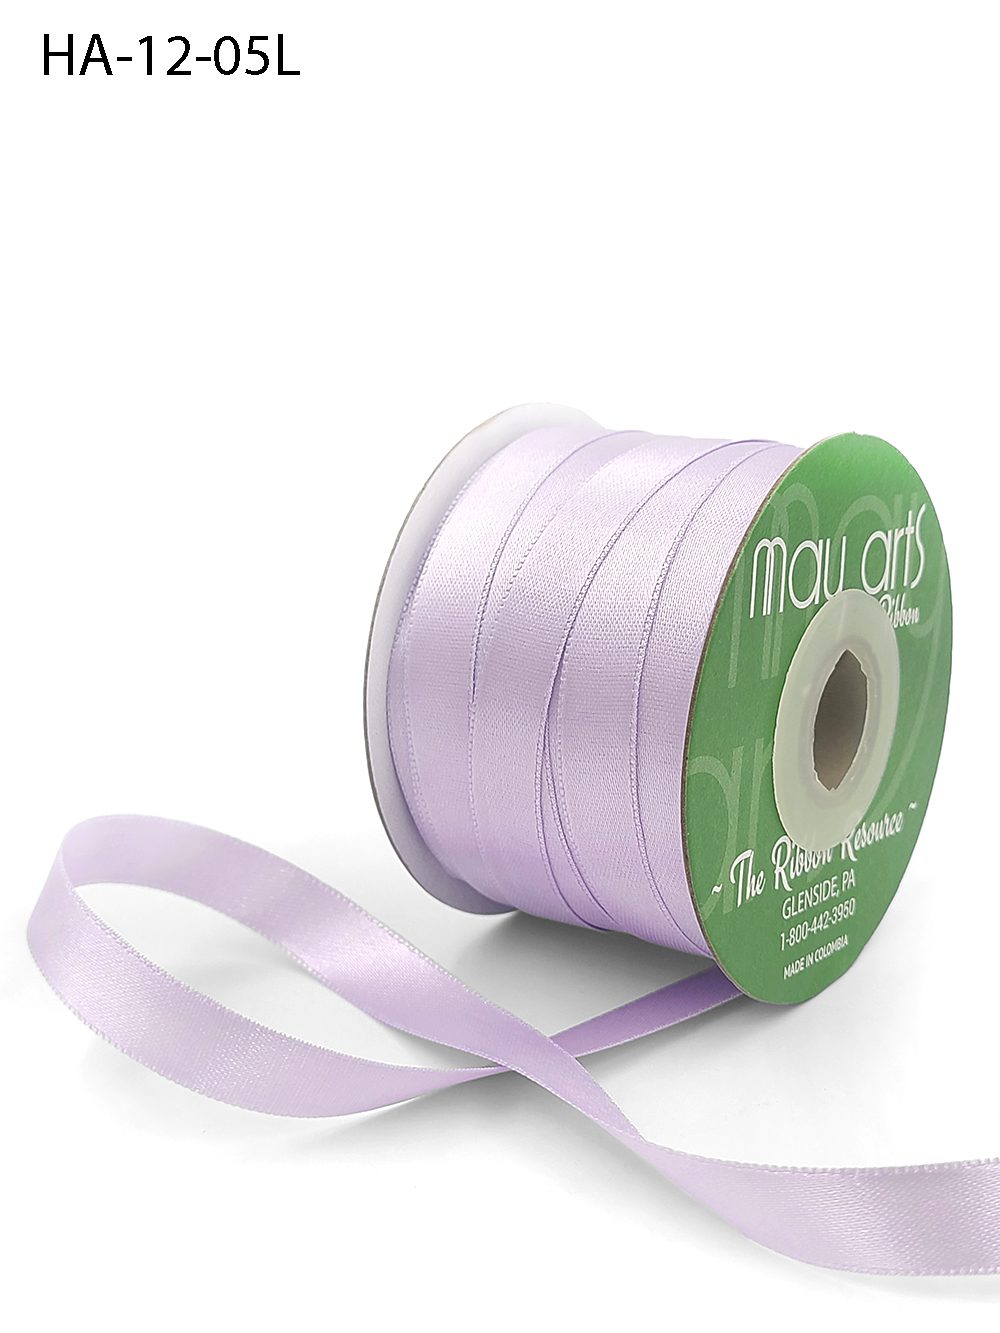 13mm Wide Cream Satin Ribbon 10 METER ROLL of Narrow Double Faced Satin  Ribbon 1/2 Inch Wide 